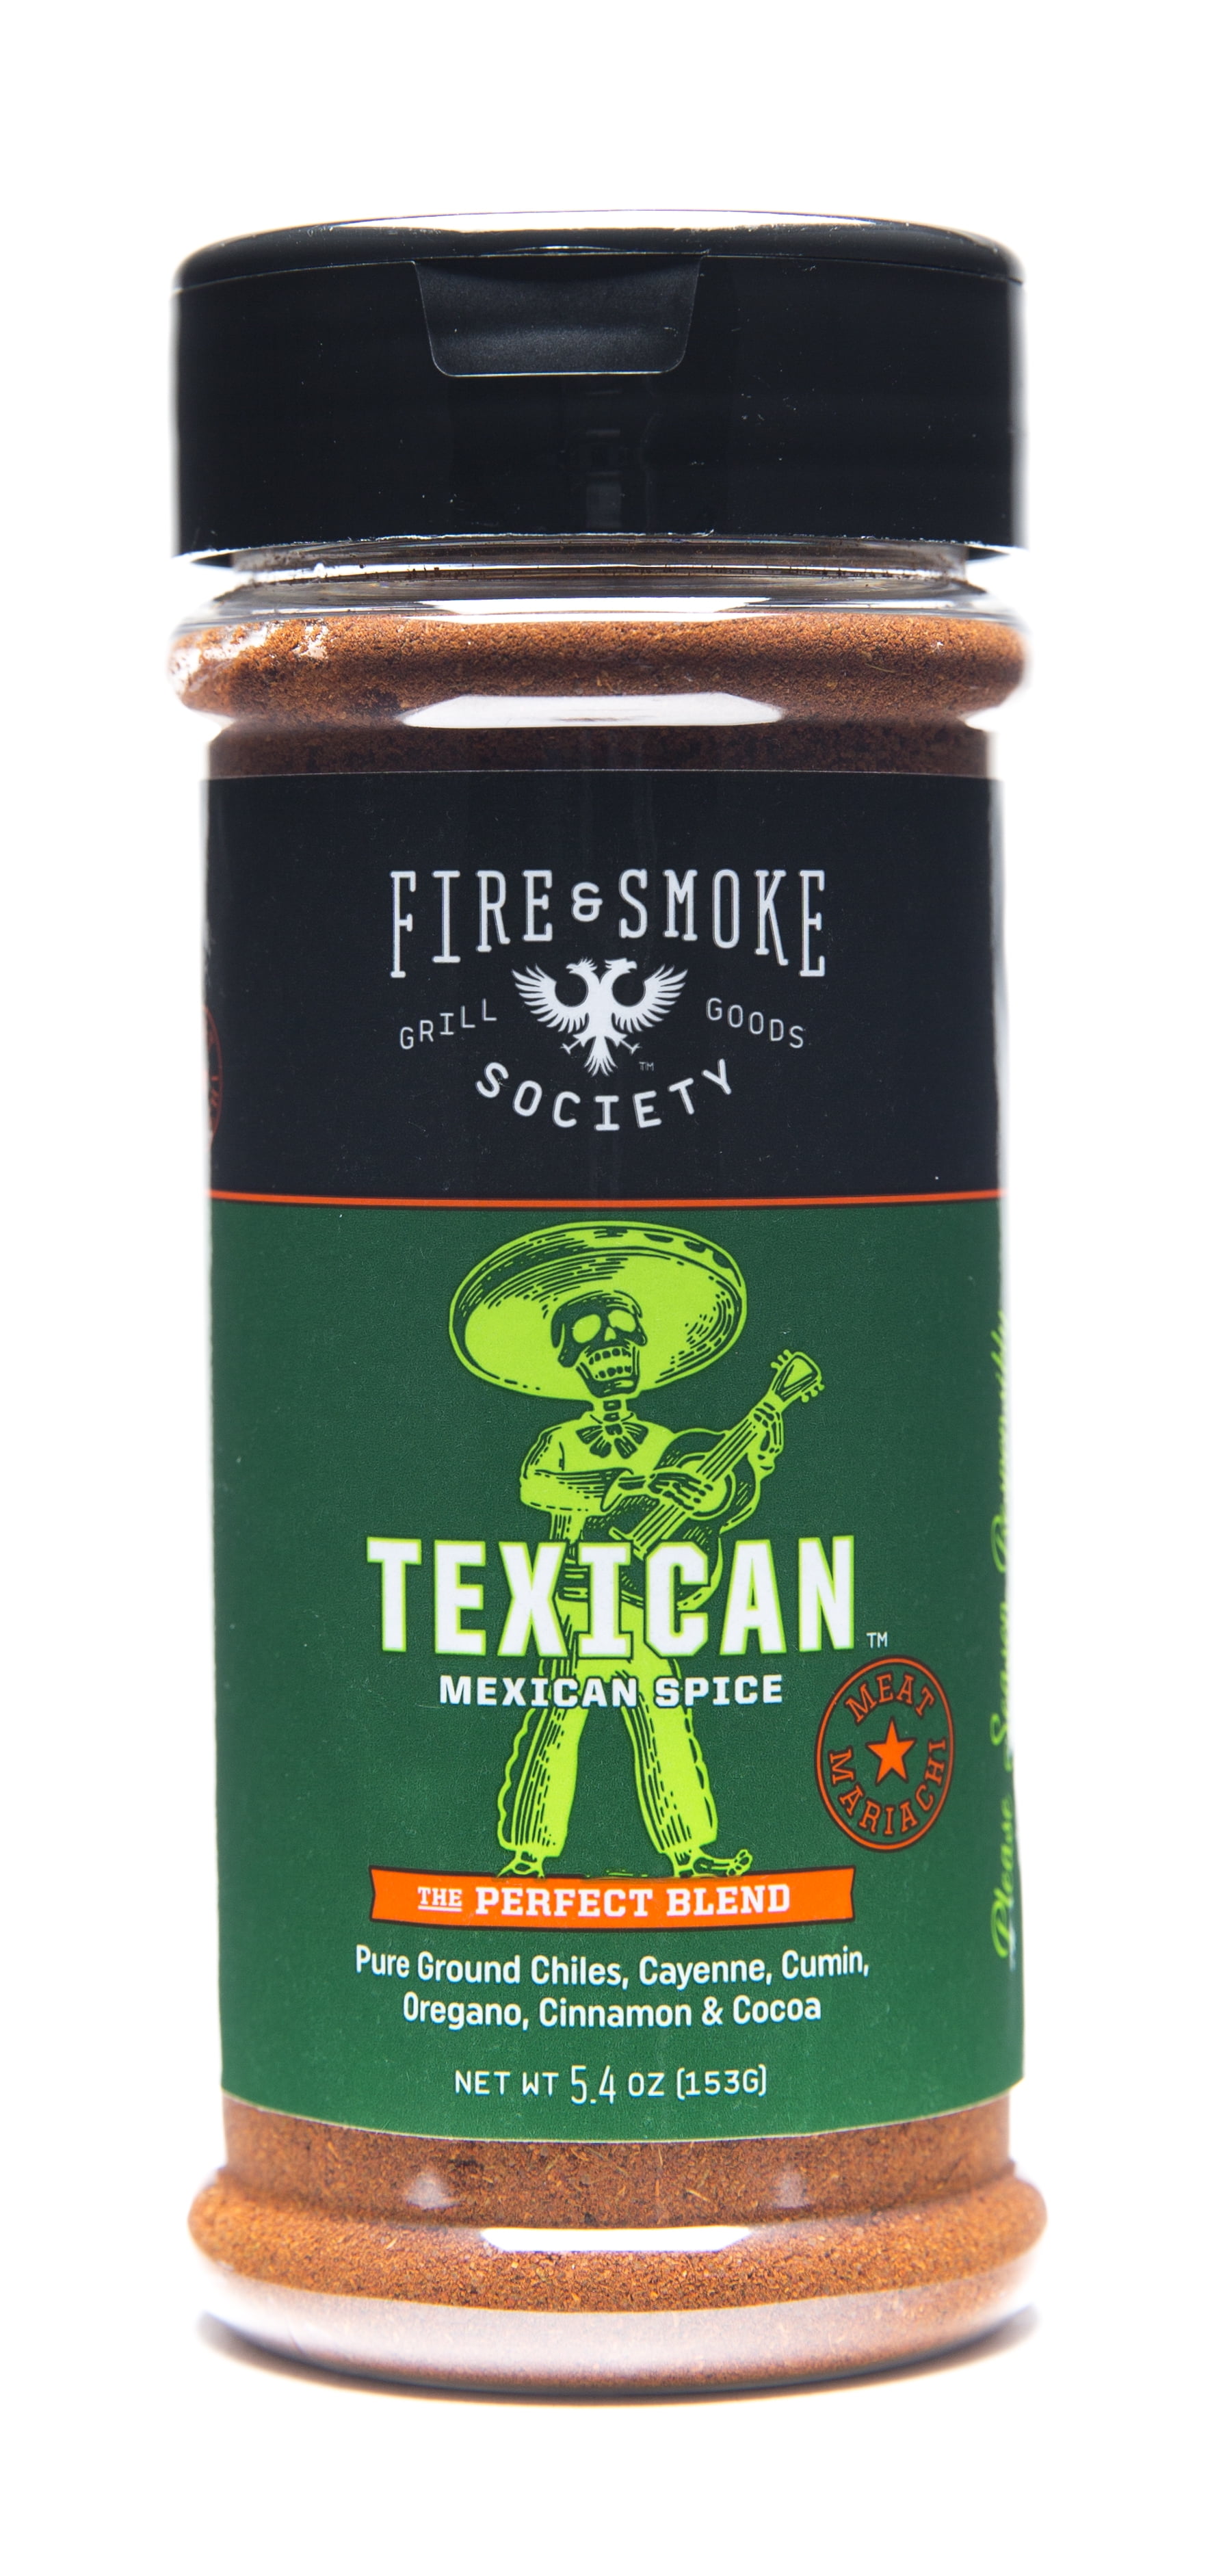 Fire & Smoke Society The Usual All-Purpose Spice Blend, 10.7 ounce